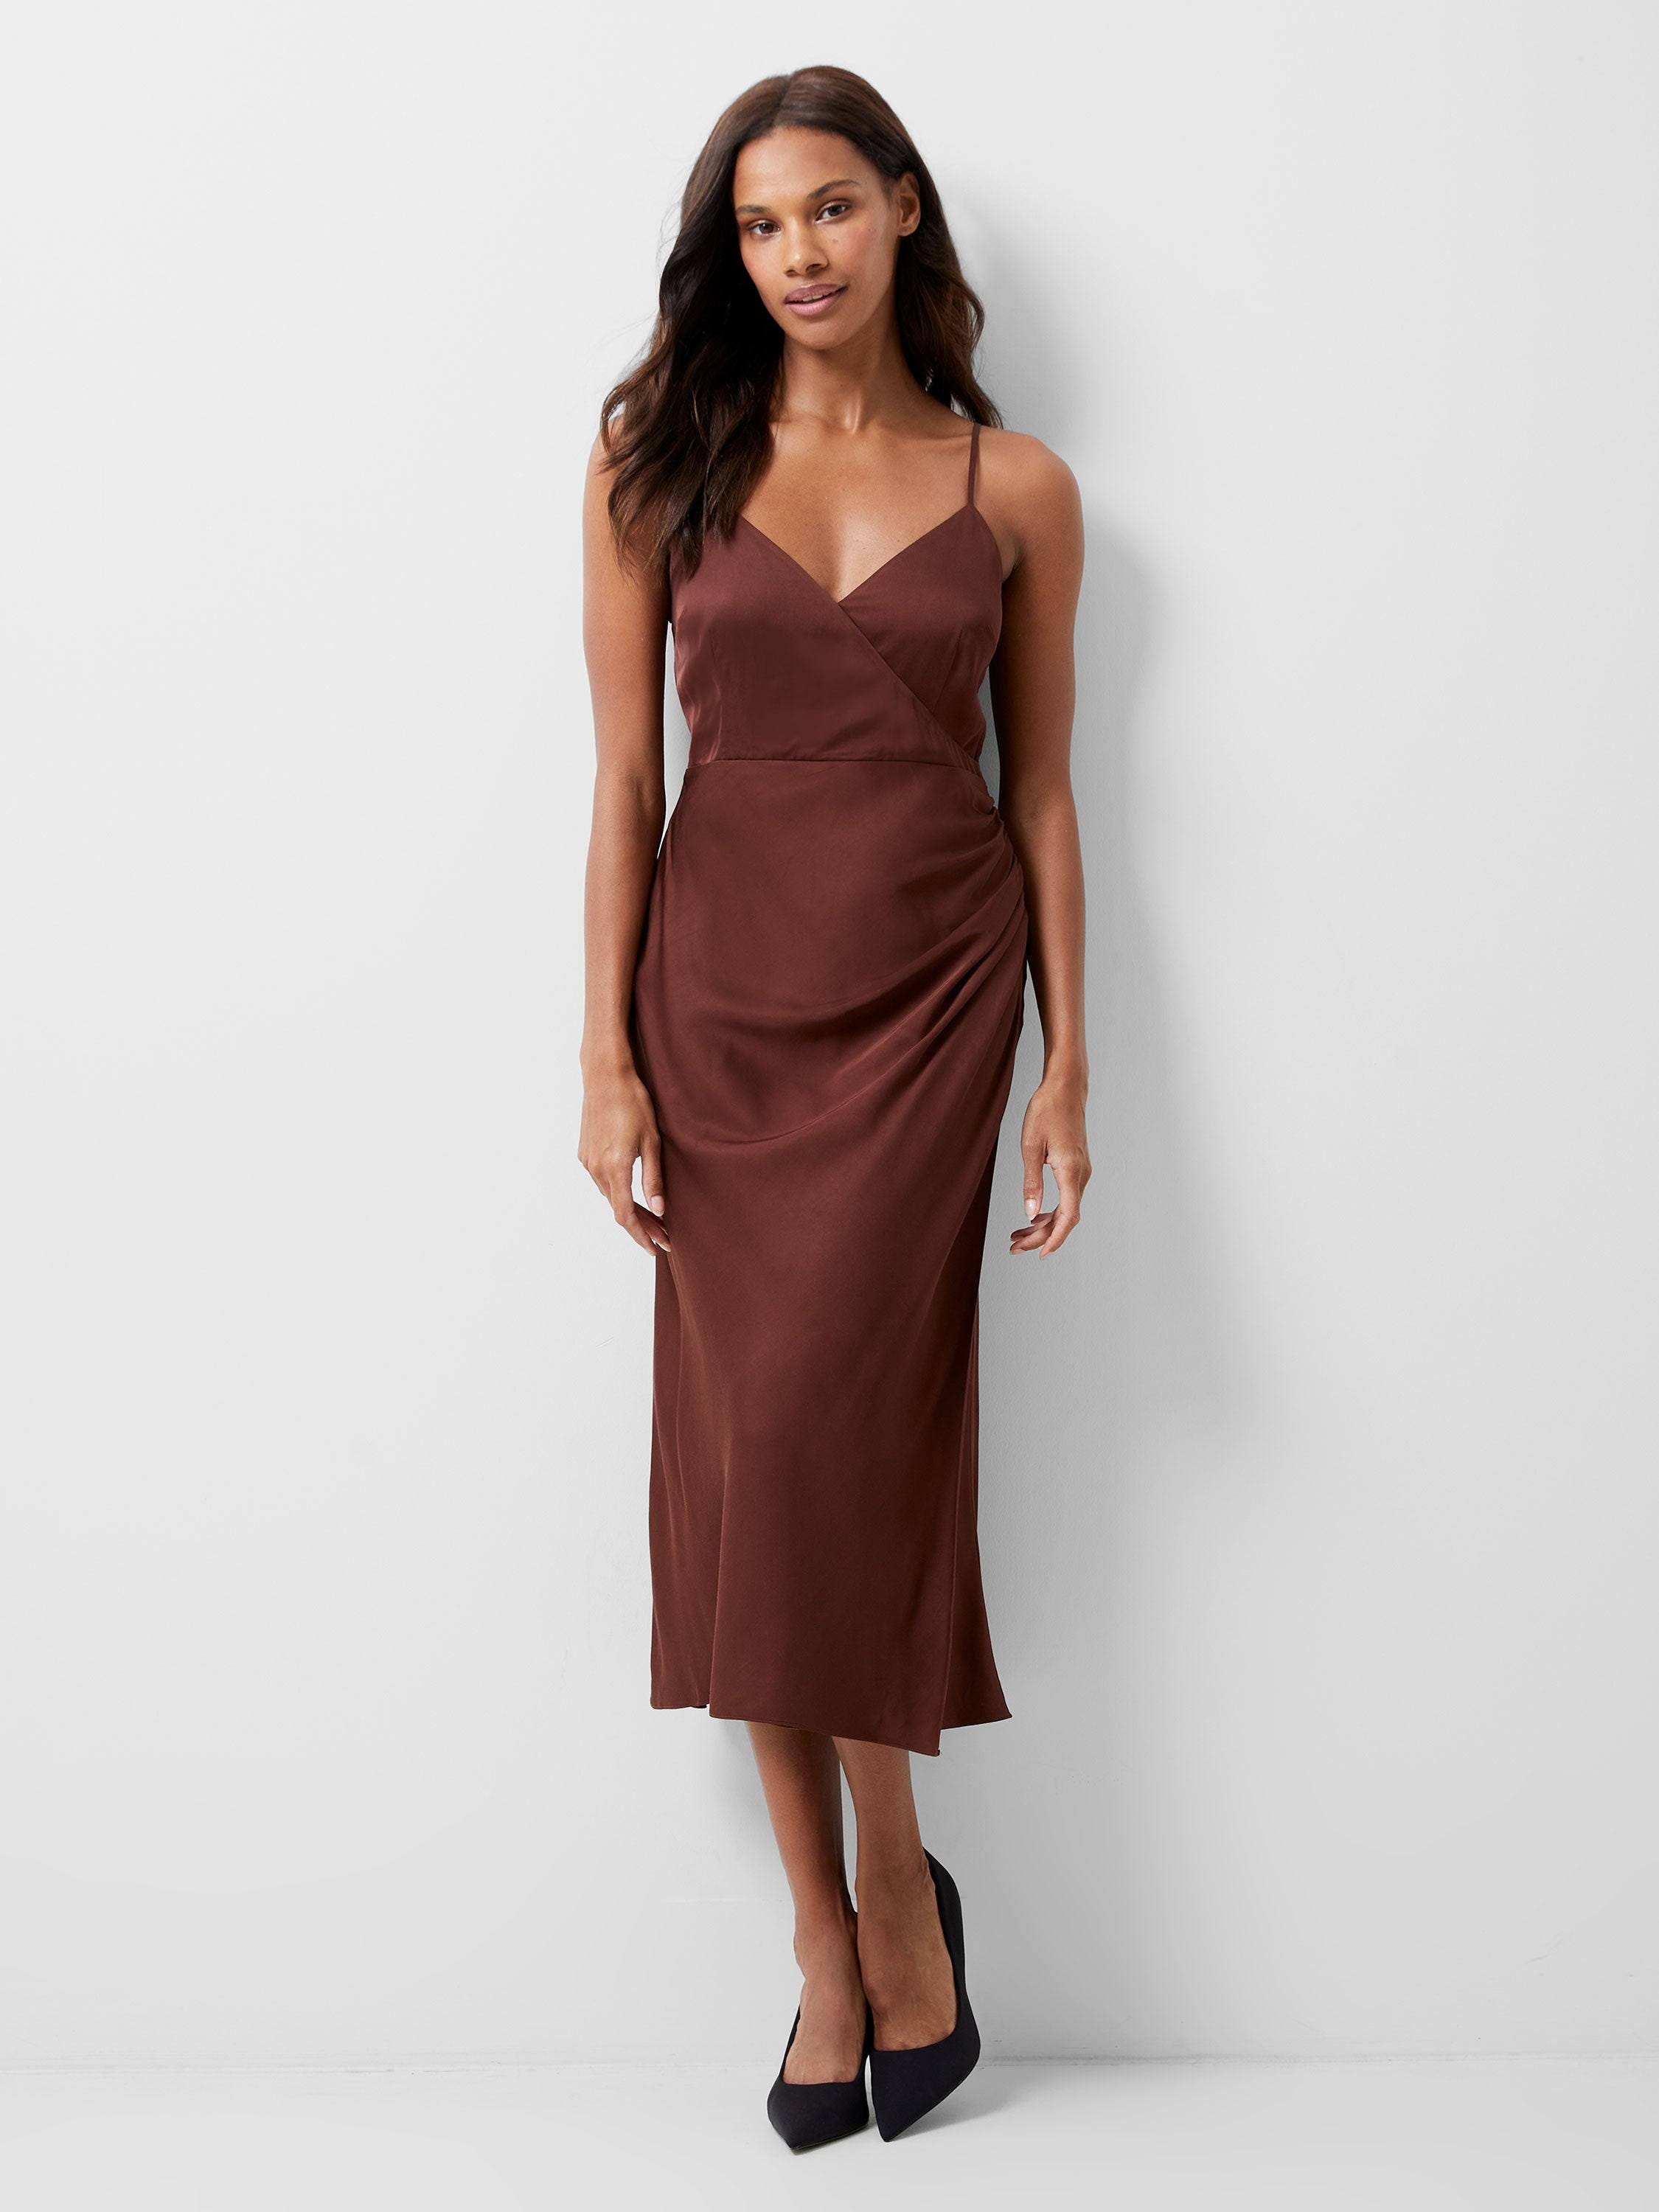 Whisper-Weight Brown Satin Midi Dress by French Connection | Image